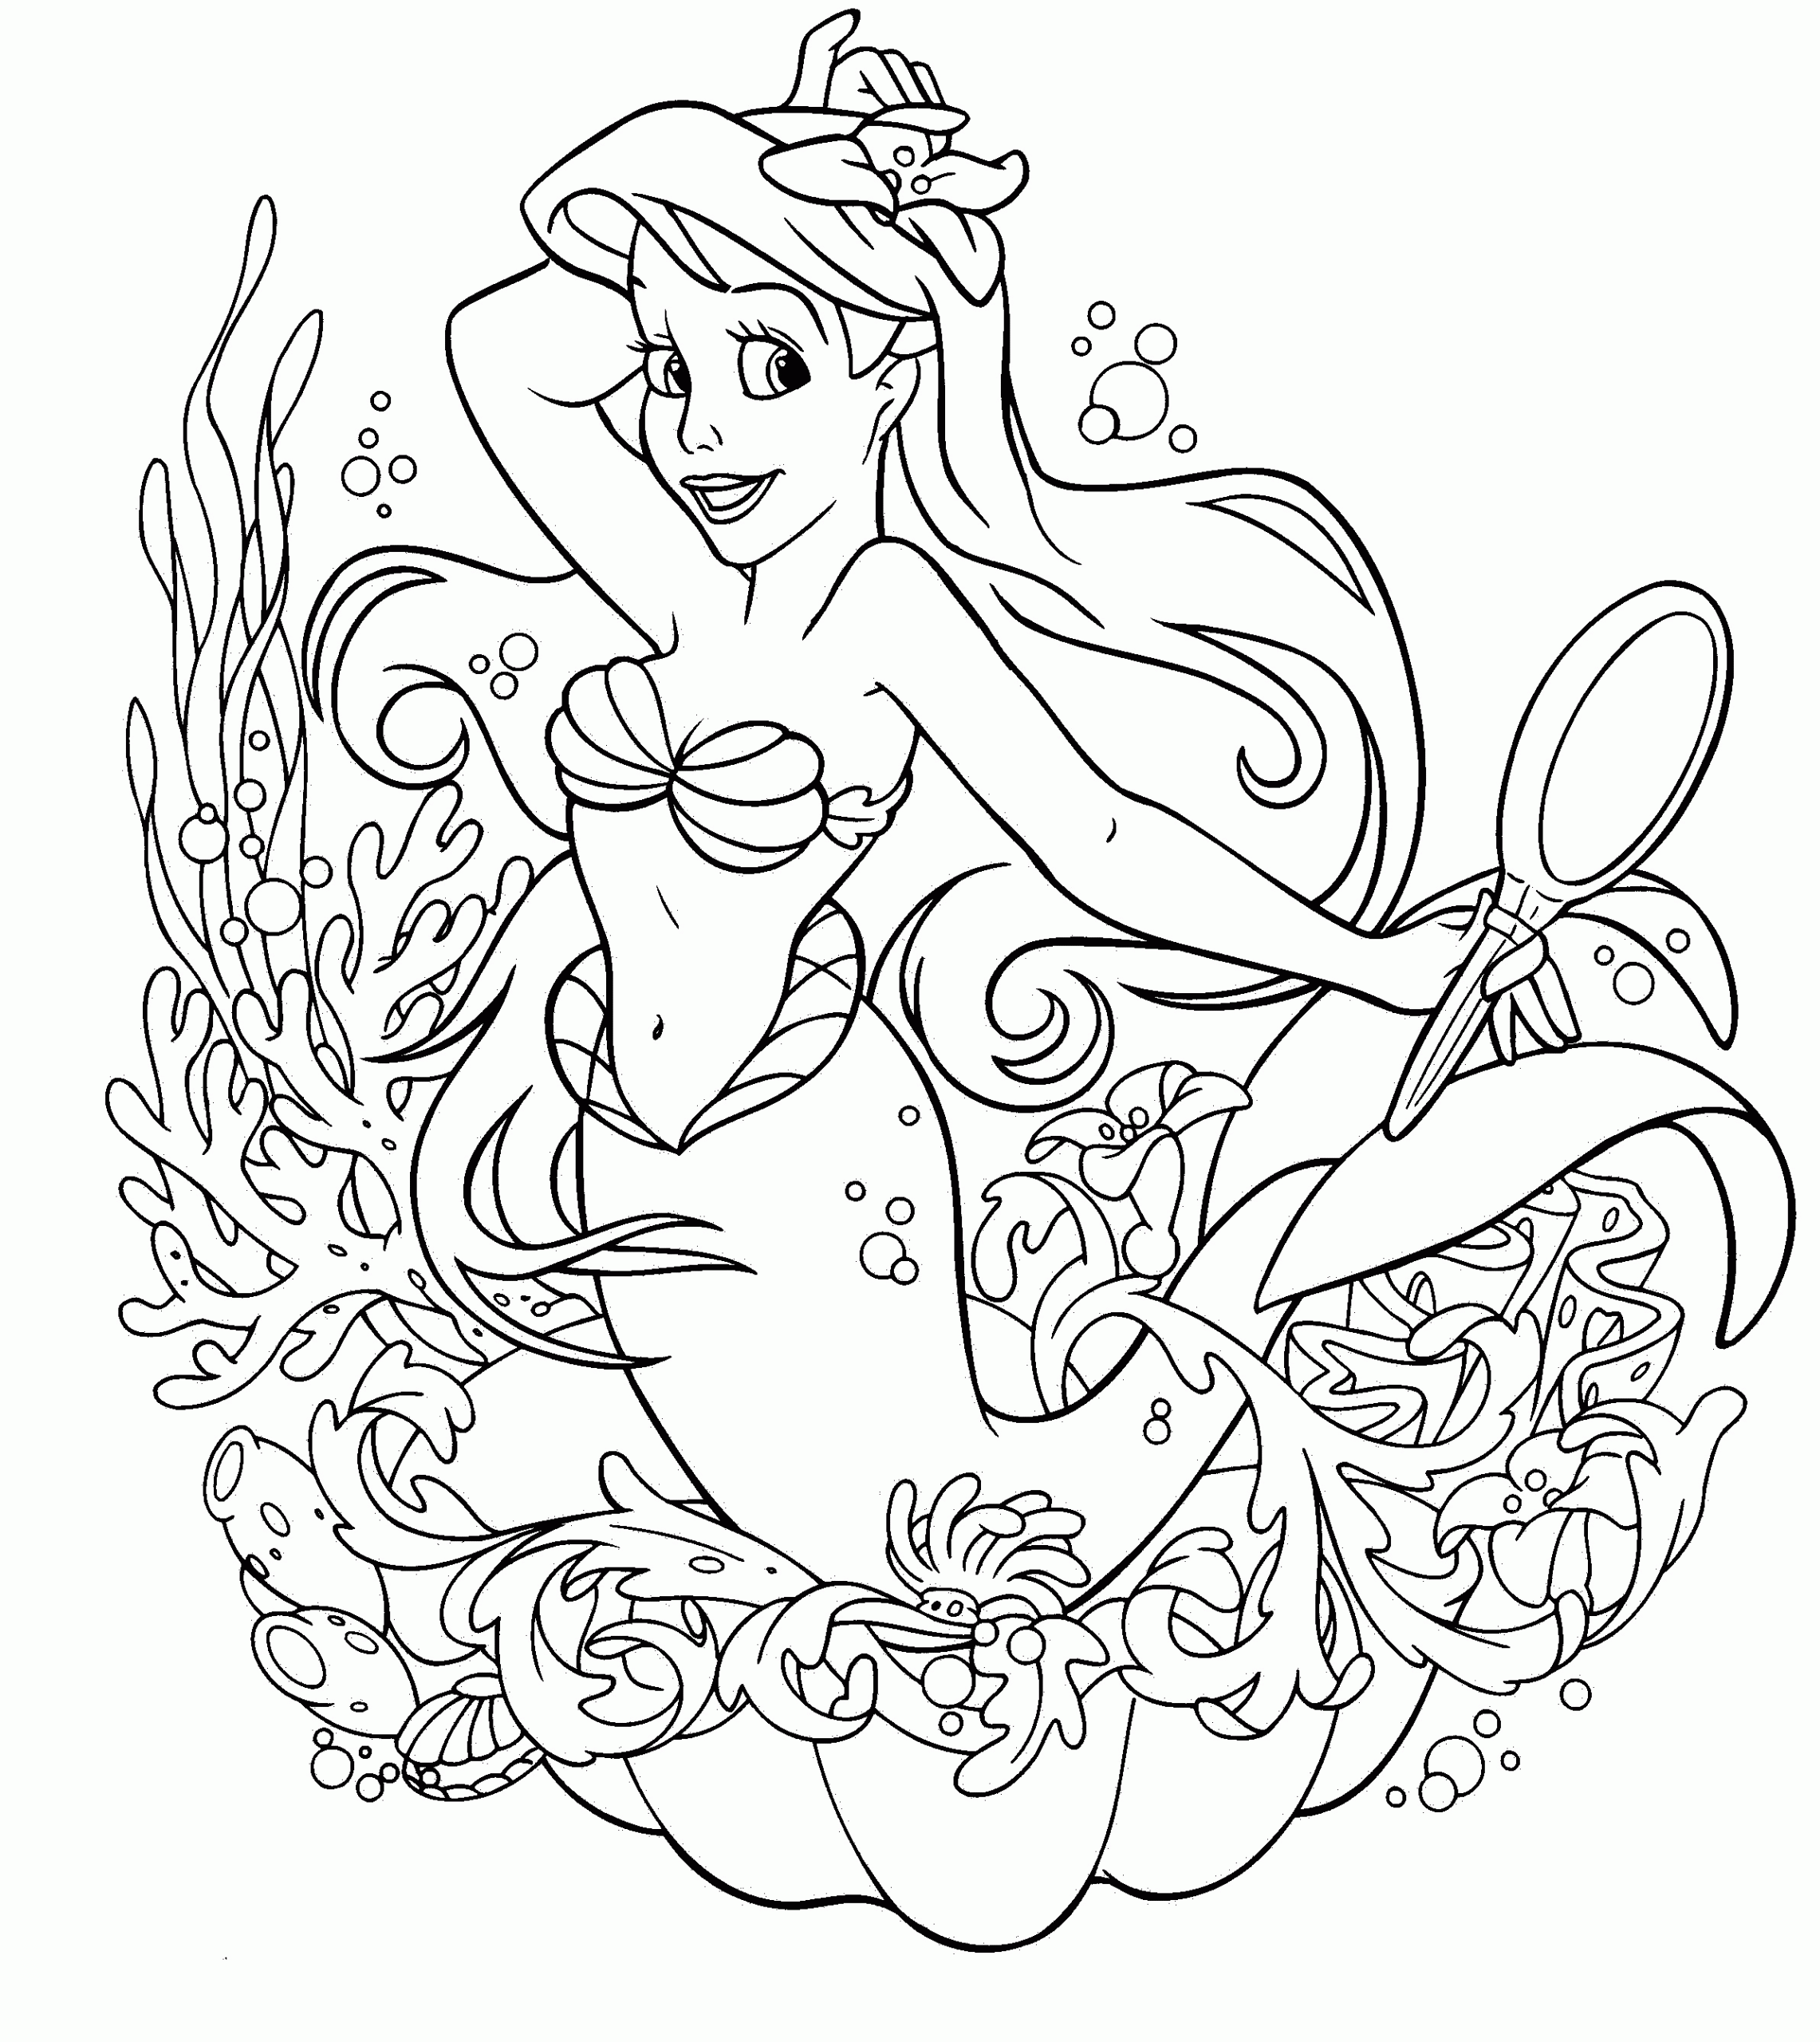 Coloring Sheets For Girls
 Coloring Pages for Girls Dr Odd